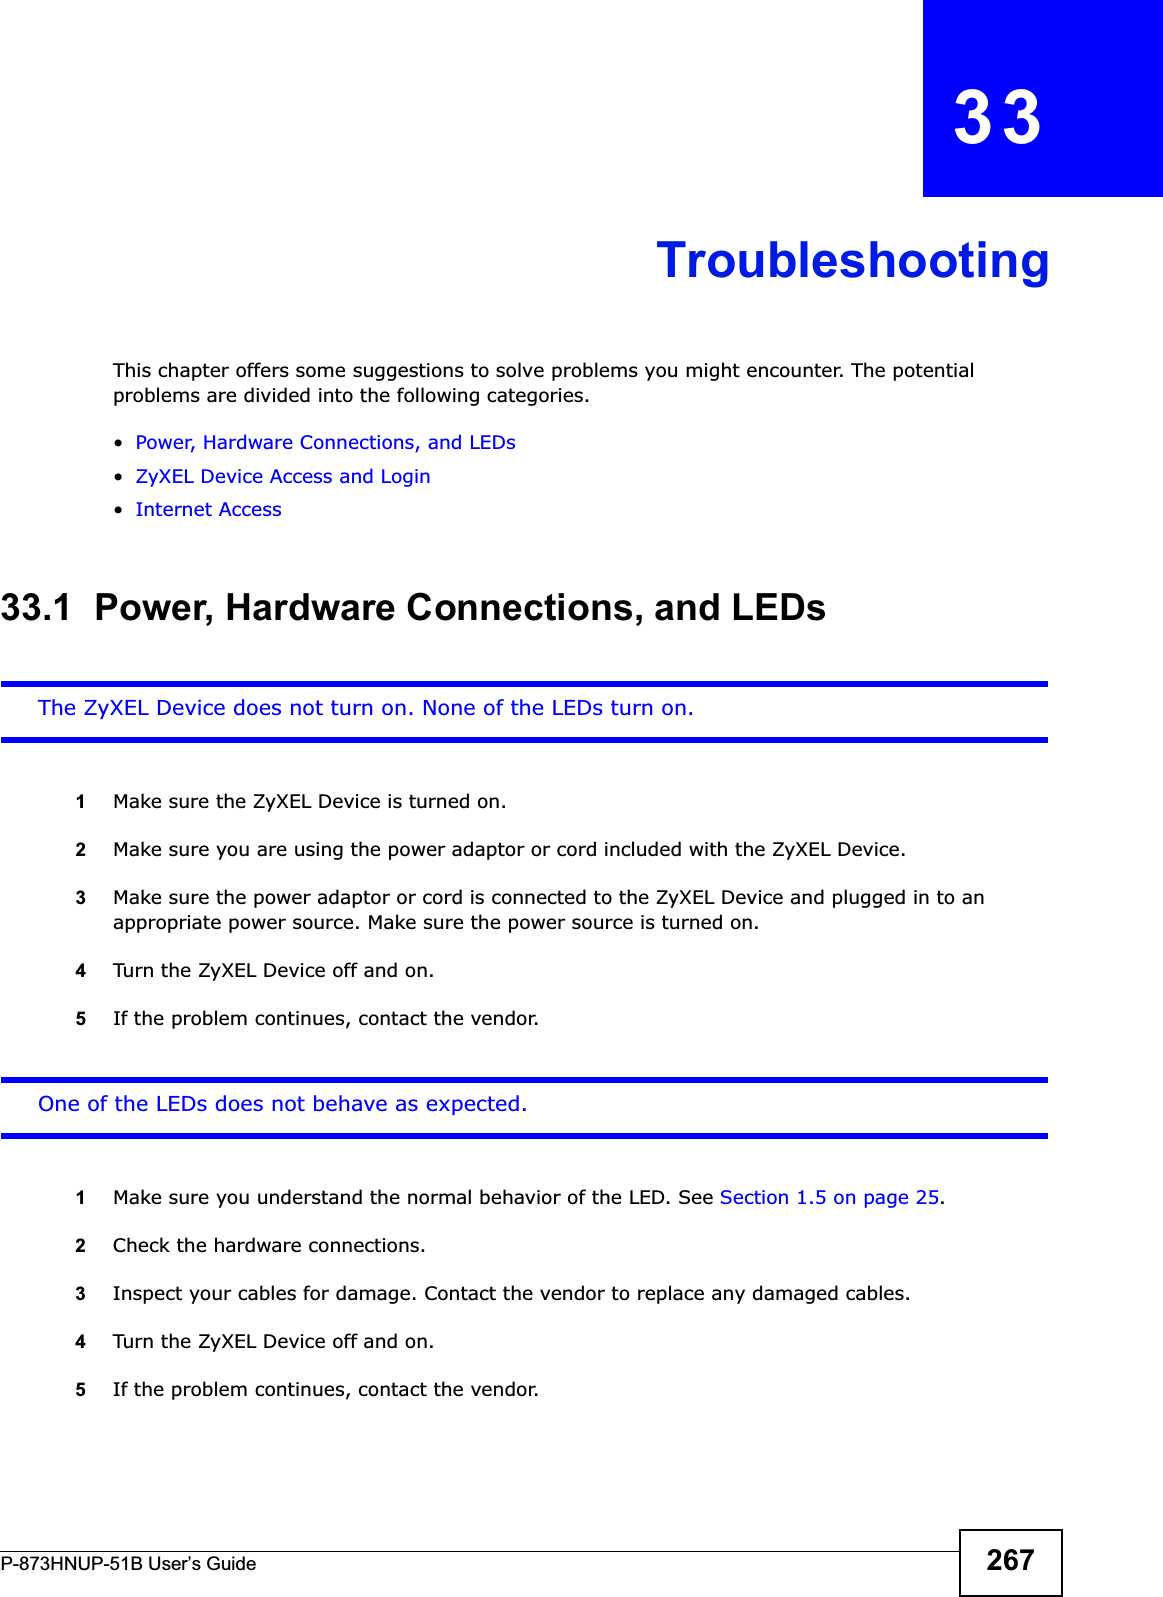 P-873HNUP-51B User’s Guide 267CHAPTER   33TroubleshootingThis chapter offers some suggestions to solve problems you might encounter. The potential problems are divided into the following categories. •Power, Hardware Connections, and LEDs•ZyXEL Device Access and Login•Internet Access33.1  Power, Hardware Connections, and LEDsThe ZyXEL Device does not turn on. None of the LEDs turn on.1Make sure the ZyXEL Device is turned on. 2Make sure you are using the power adaptor or cord included with the ZyXEL Device.3Make sure the power adaptor or cord is connected to the ZyXEL Device and plugged in to an appropriate power source. Make sure the power source is turned on.4Turn the ZyXEL Device off and on.5If the problem continues, contact the vendor.One of the LEDs does not behave as expected.1Make sure you understand the normal behavior of the LED. See Section 1.5 on page 25.2Check the hardware connections.3Inspect your cables for damage. Contact the vendor to replace any damaged cables.4Turn the ZyXEL Device off and on.5If the problem continues, contact the vendor.